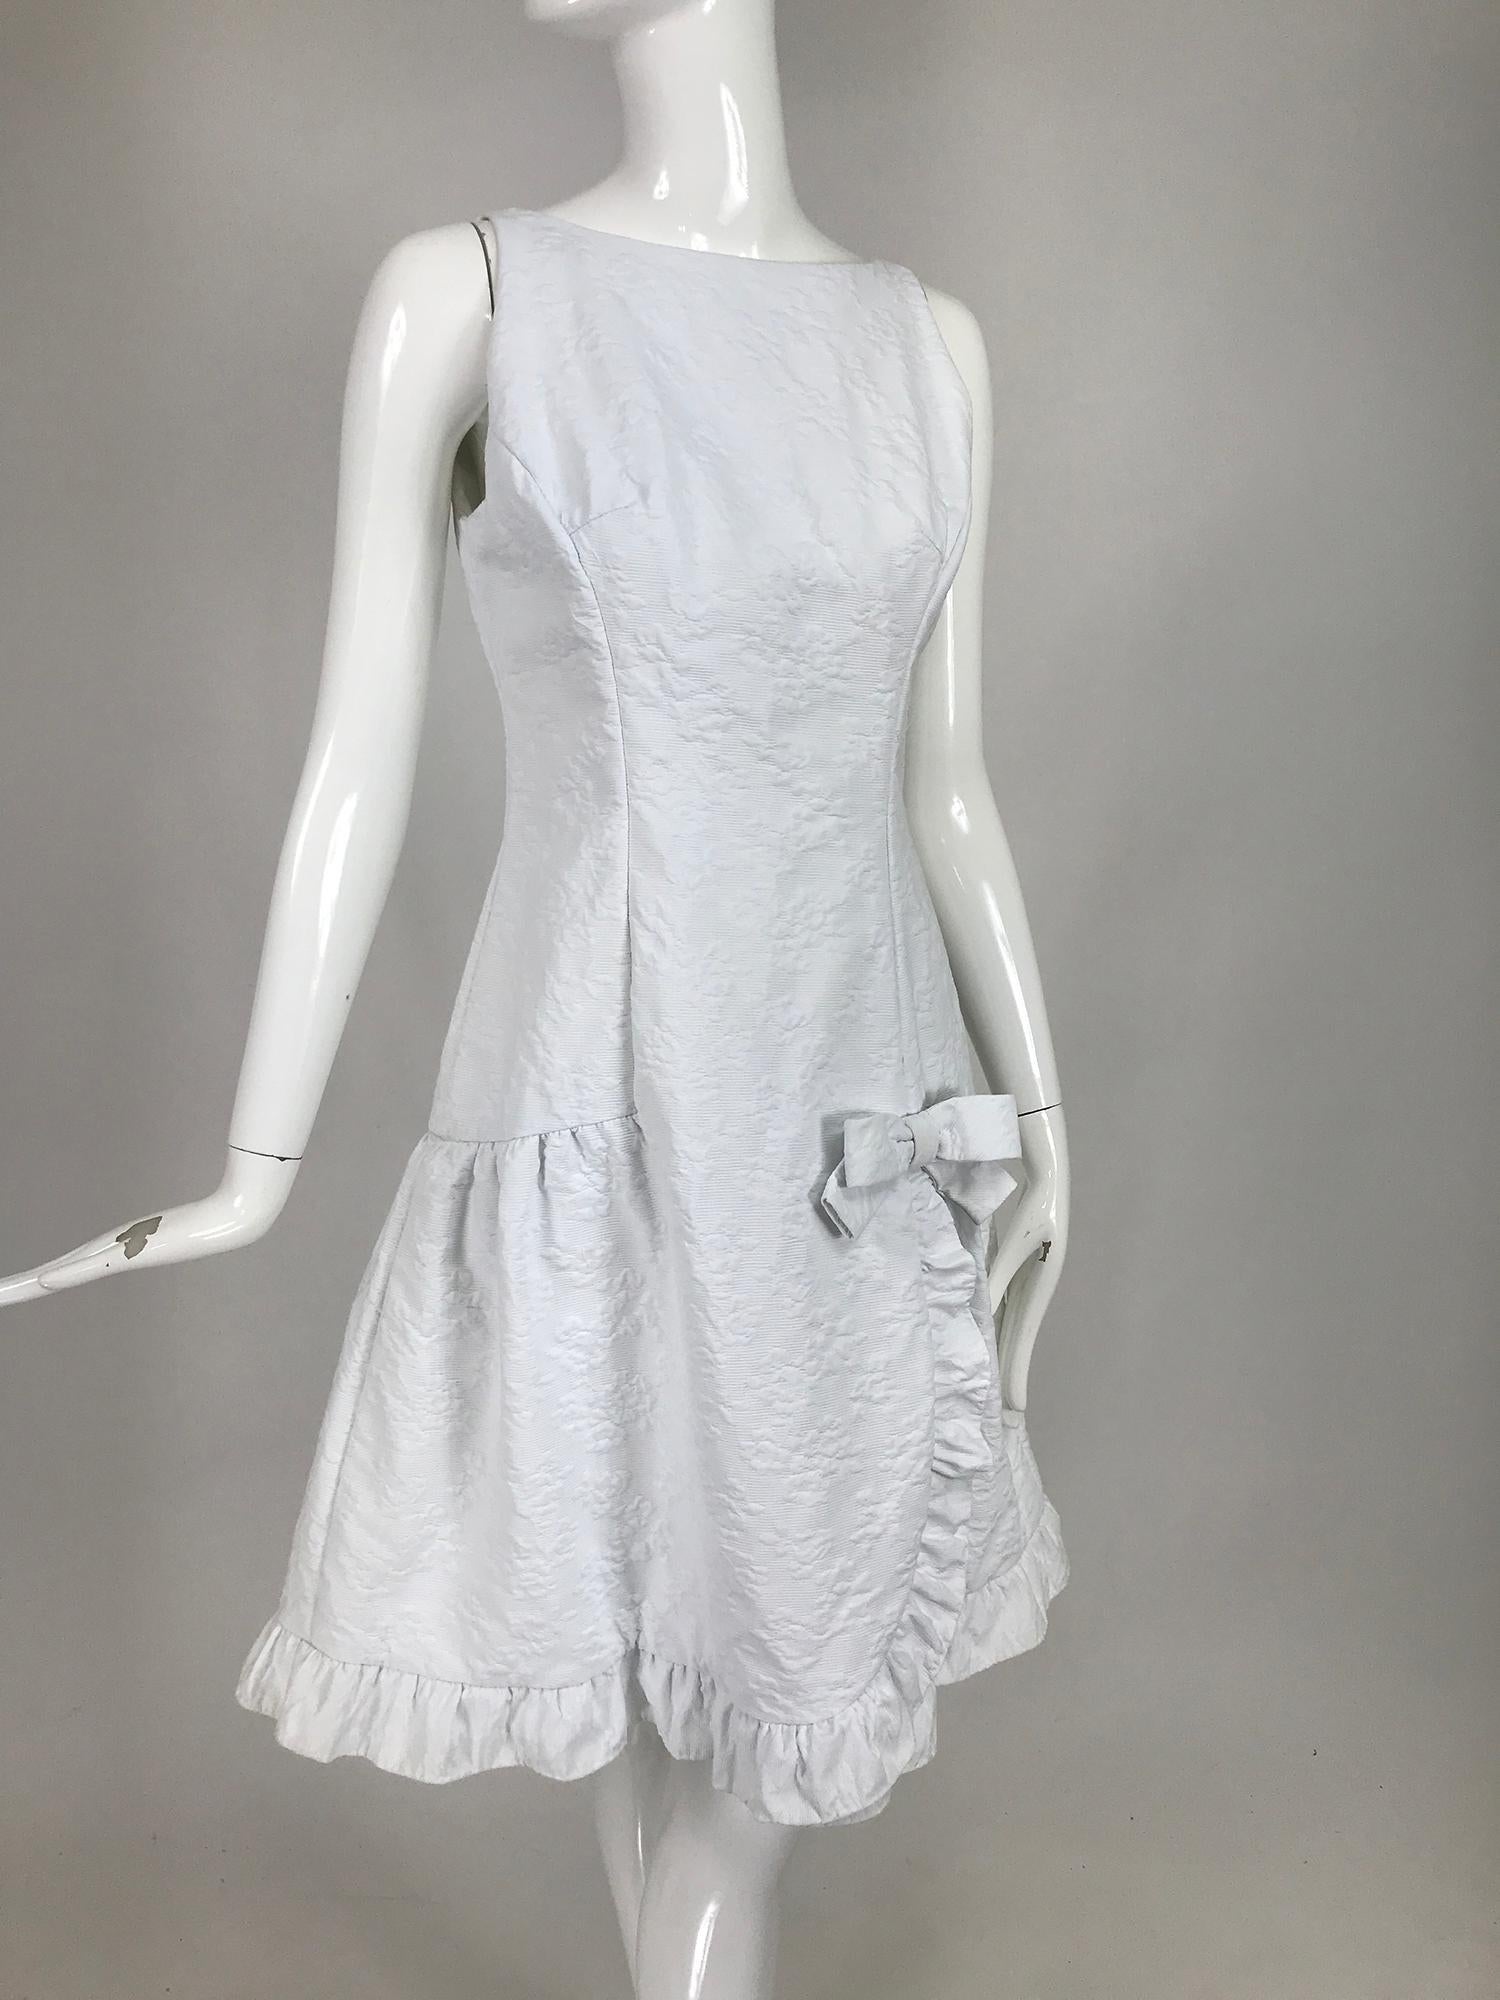 Vintage Matelassé, white cotton, ruffle sun dress from the 1960s. Sleeveless, jewel neckline, princess seam dress in lightweight quilt texture white cotton. Drop waist dress with a bow tie at the hip front, the skirt has a gathered ruffle edge trim.